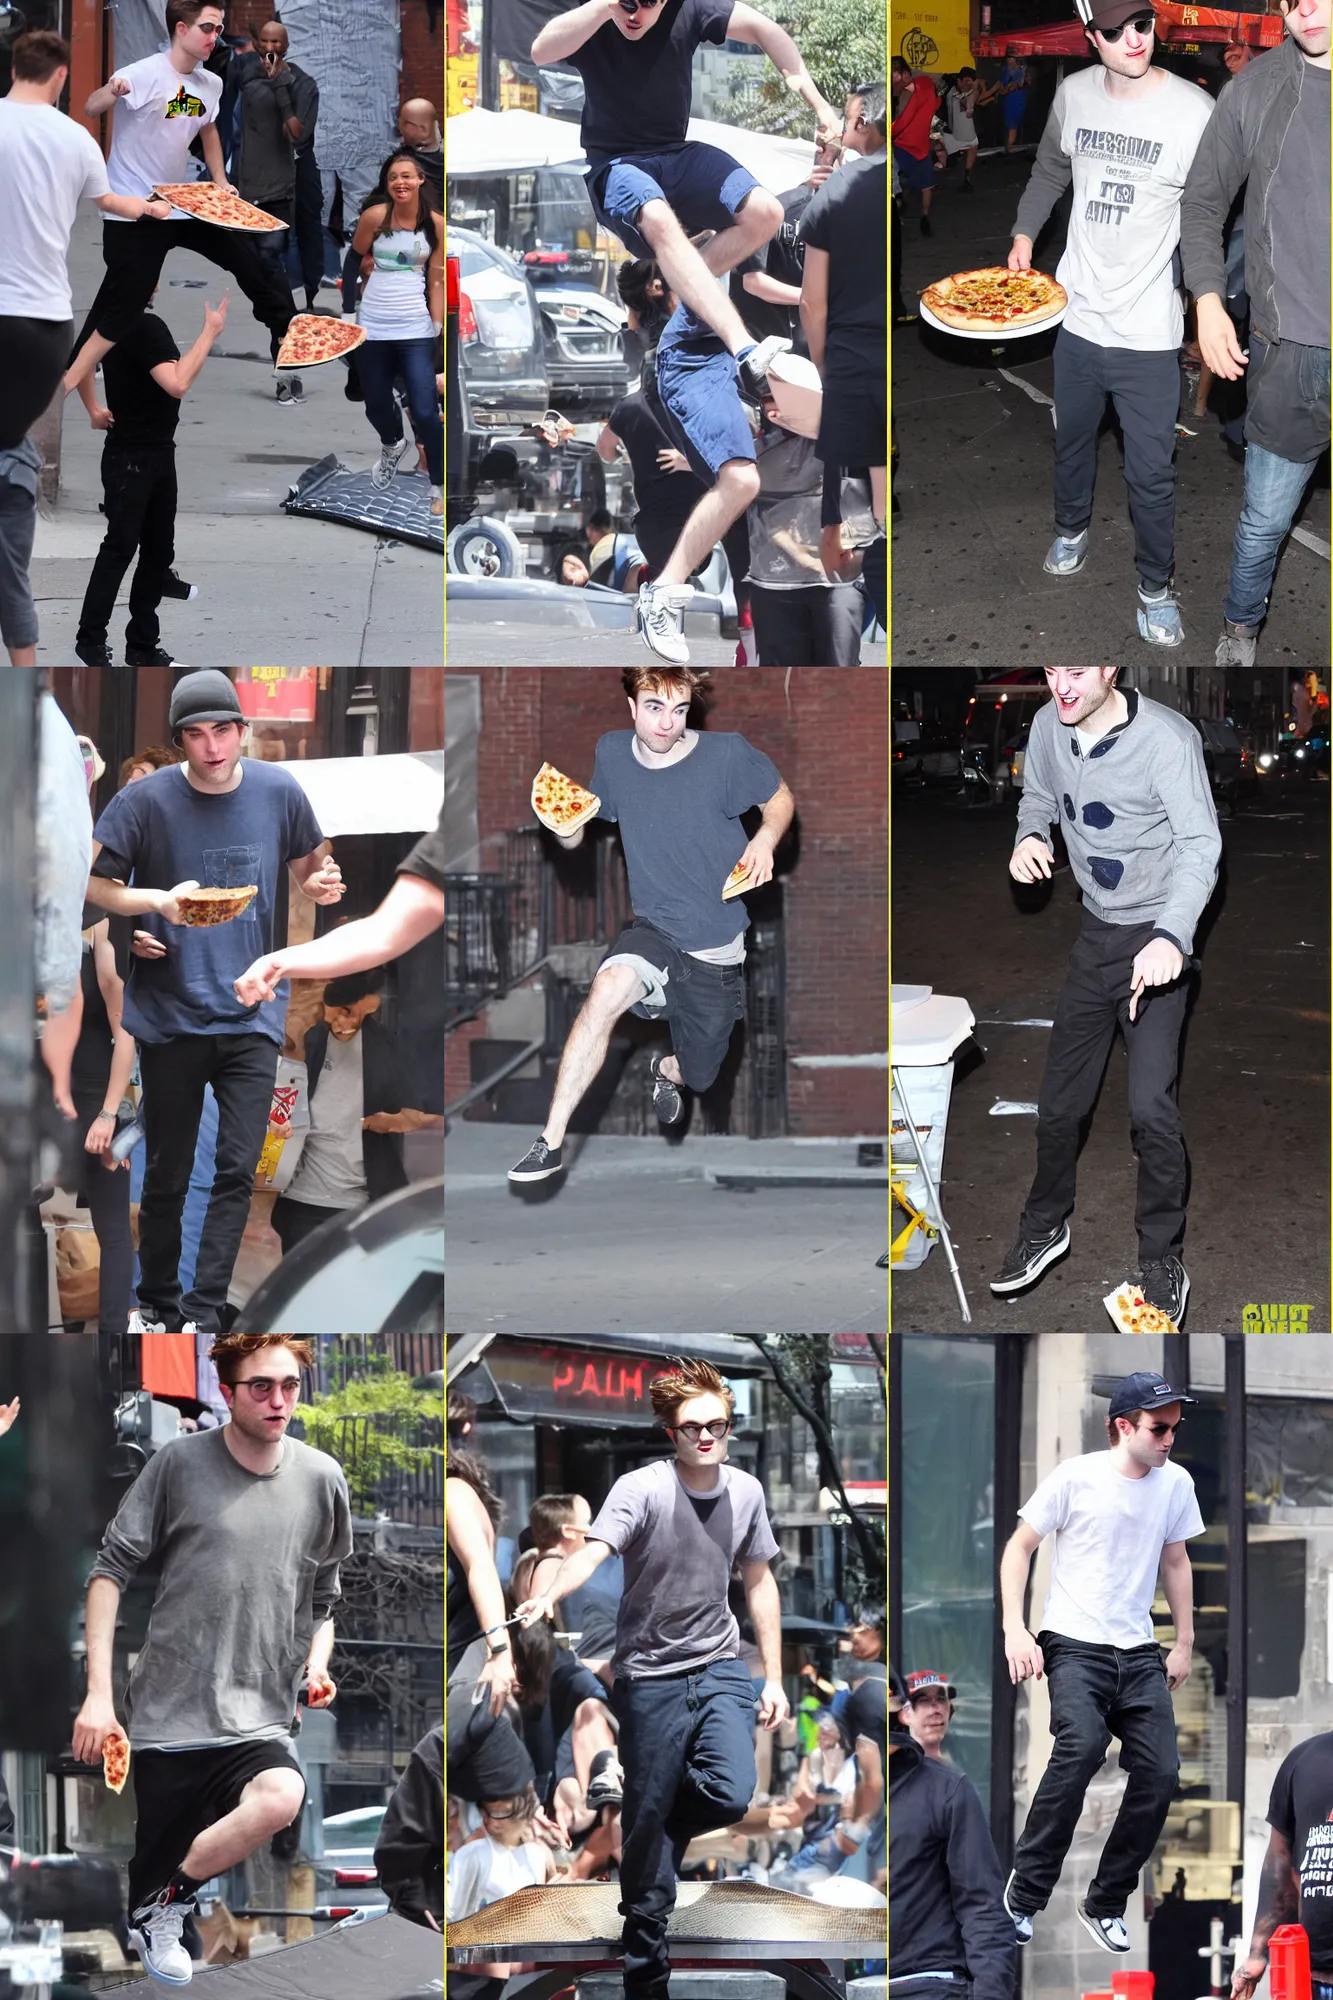 Prompt: robert pattinson eating pizza while jumping on a trampoline in new york city, photography